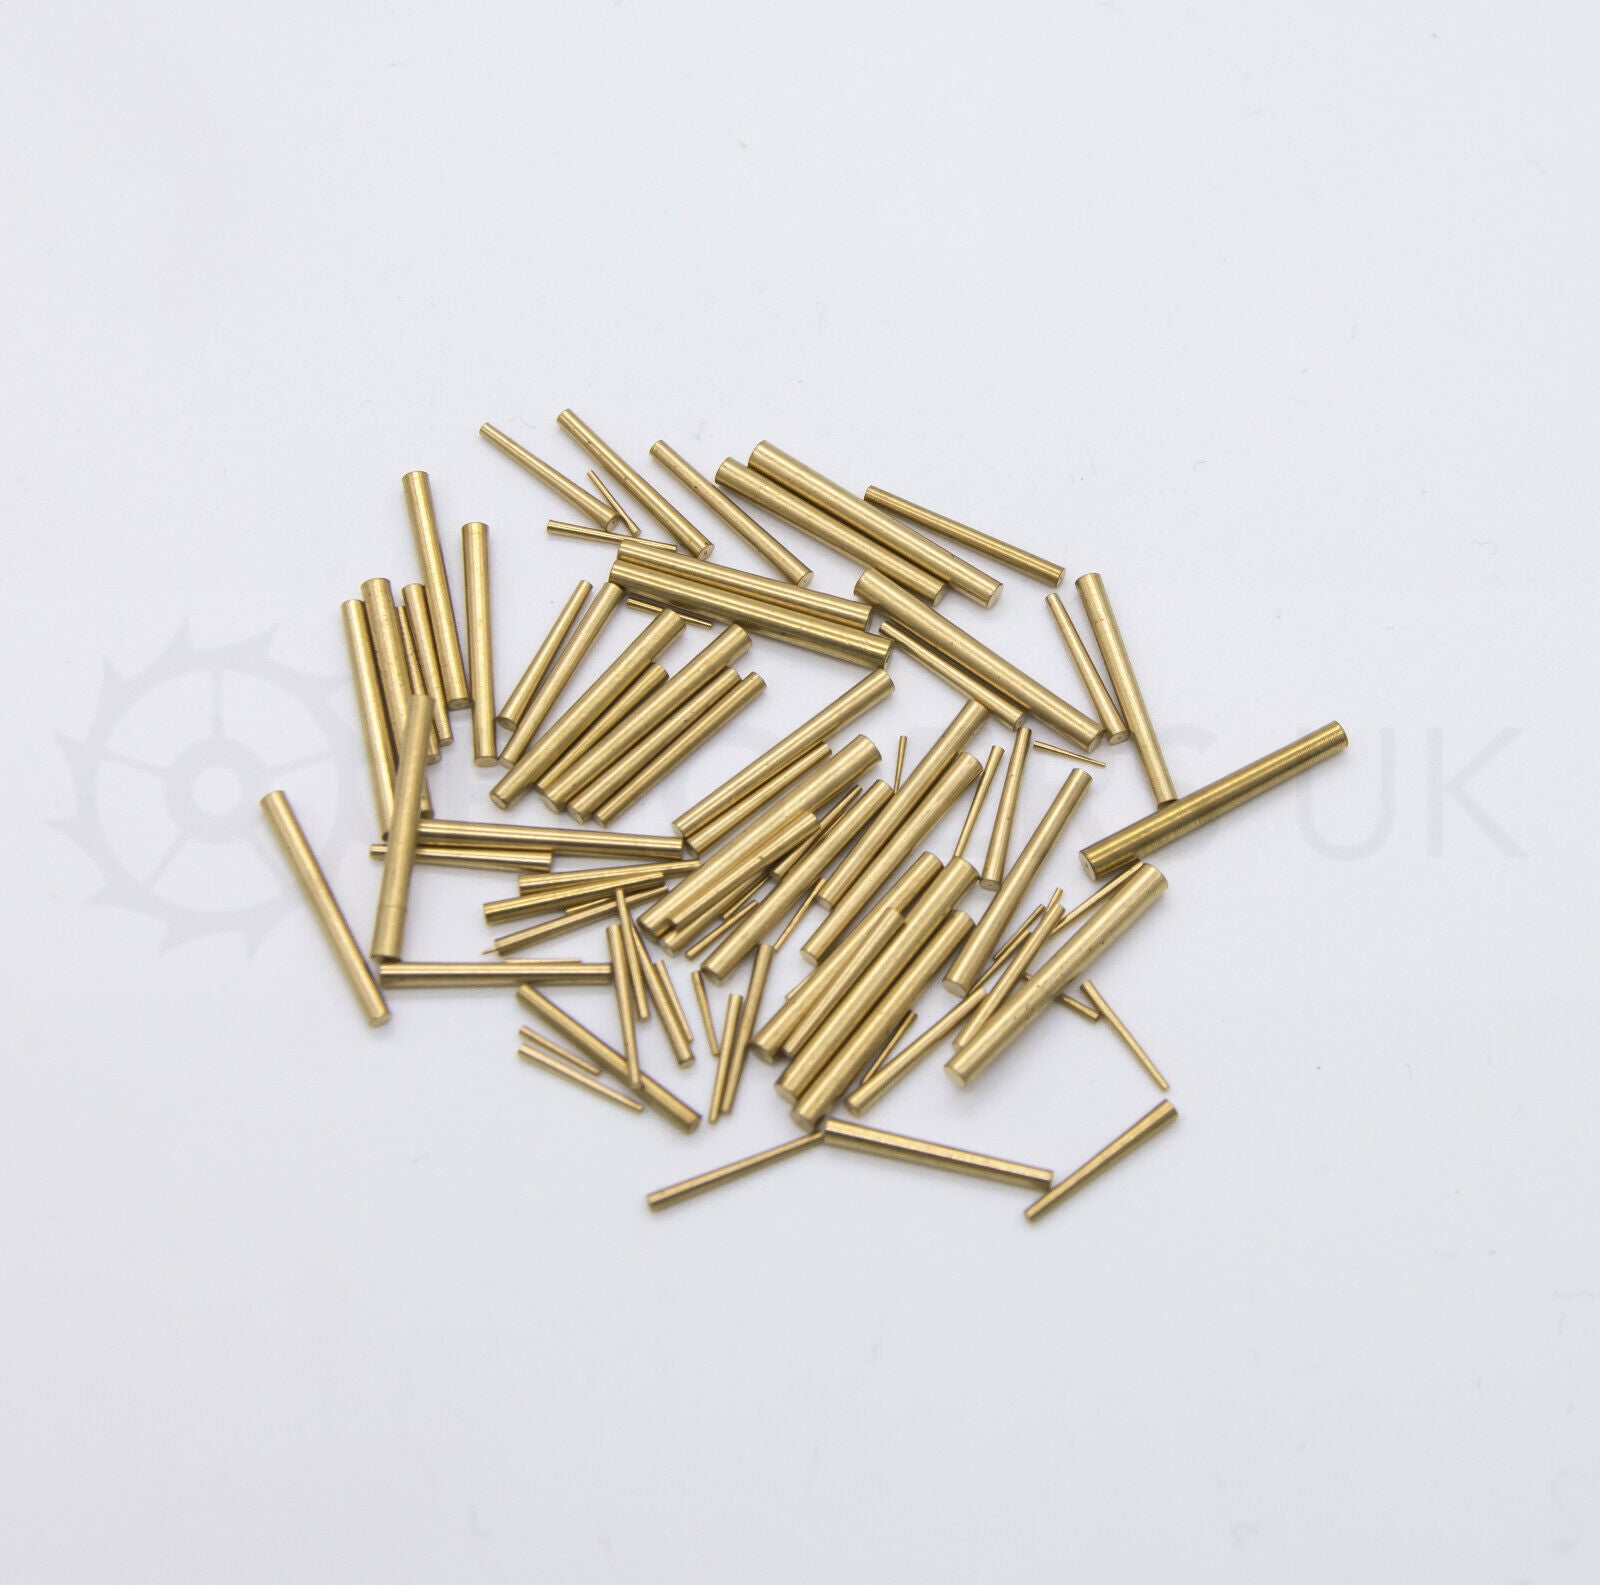 100x Brass Clock Tapered Pins - Assorted Mixed Sizes